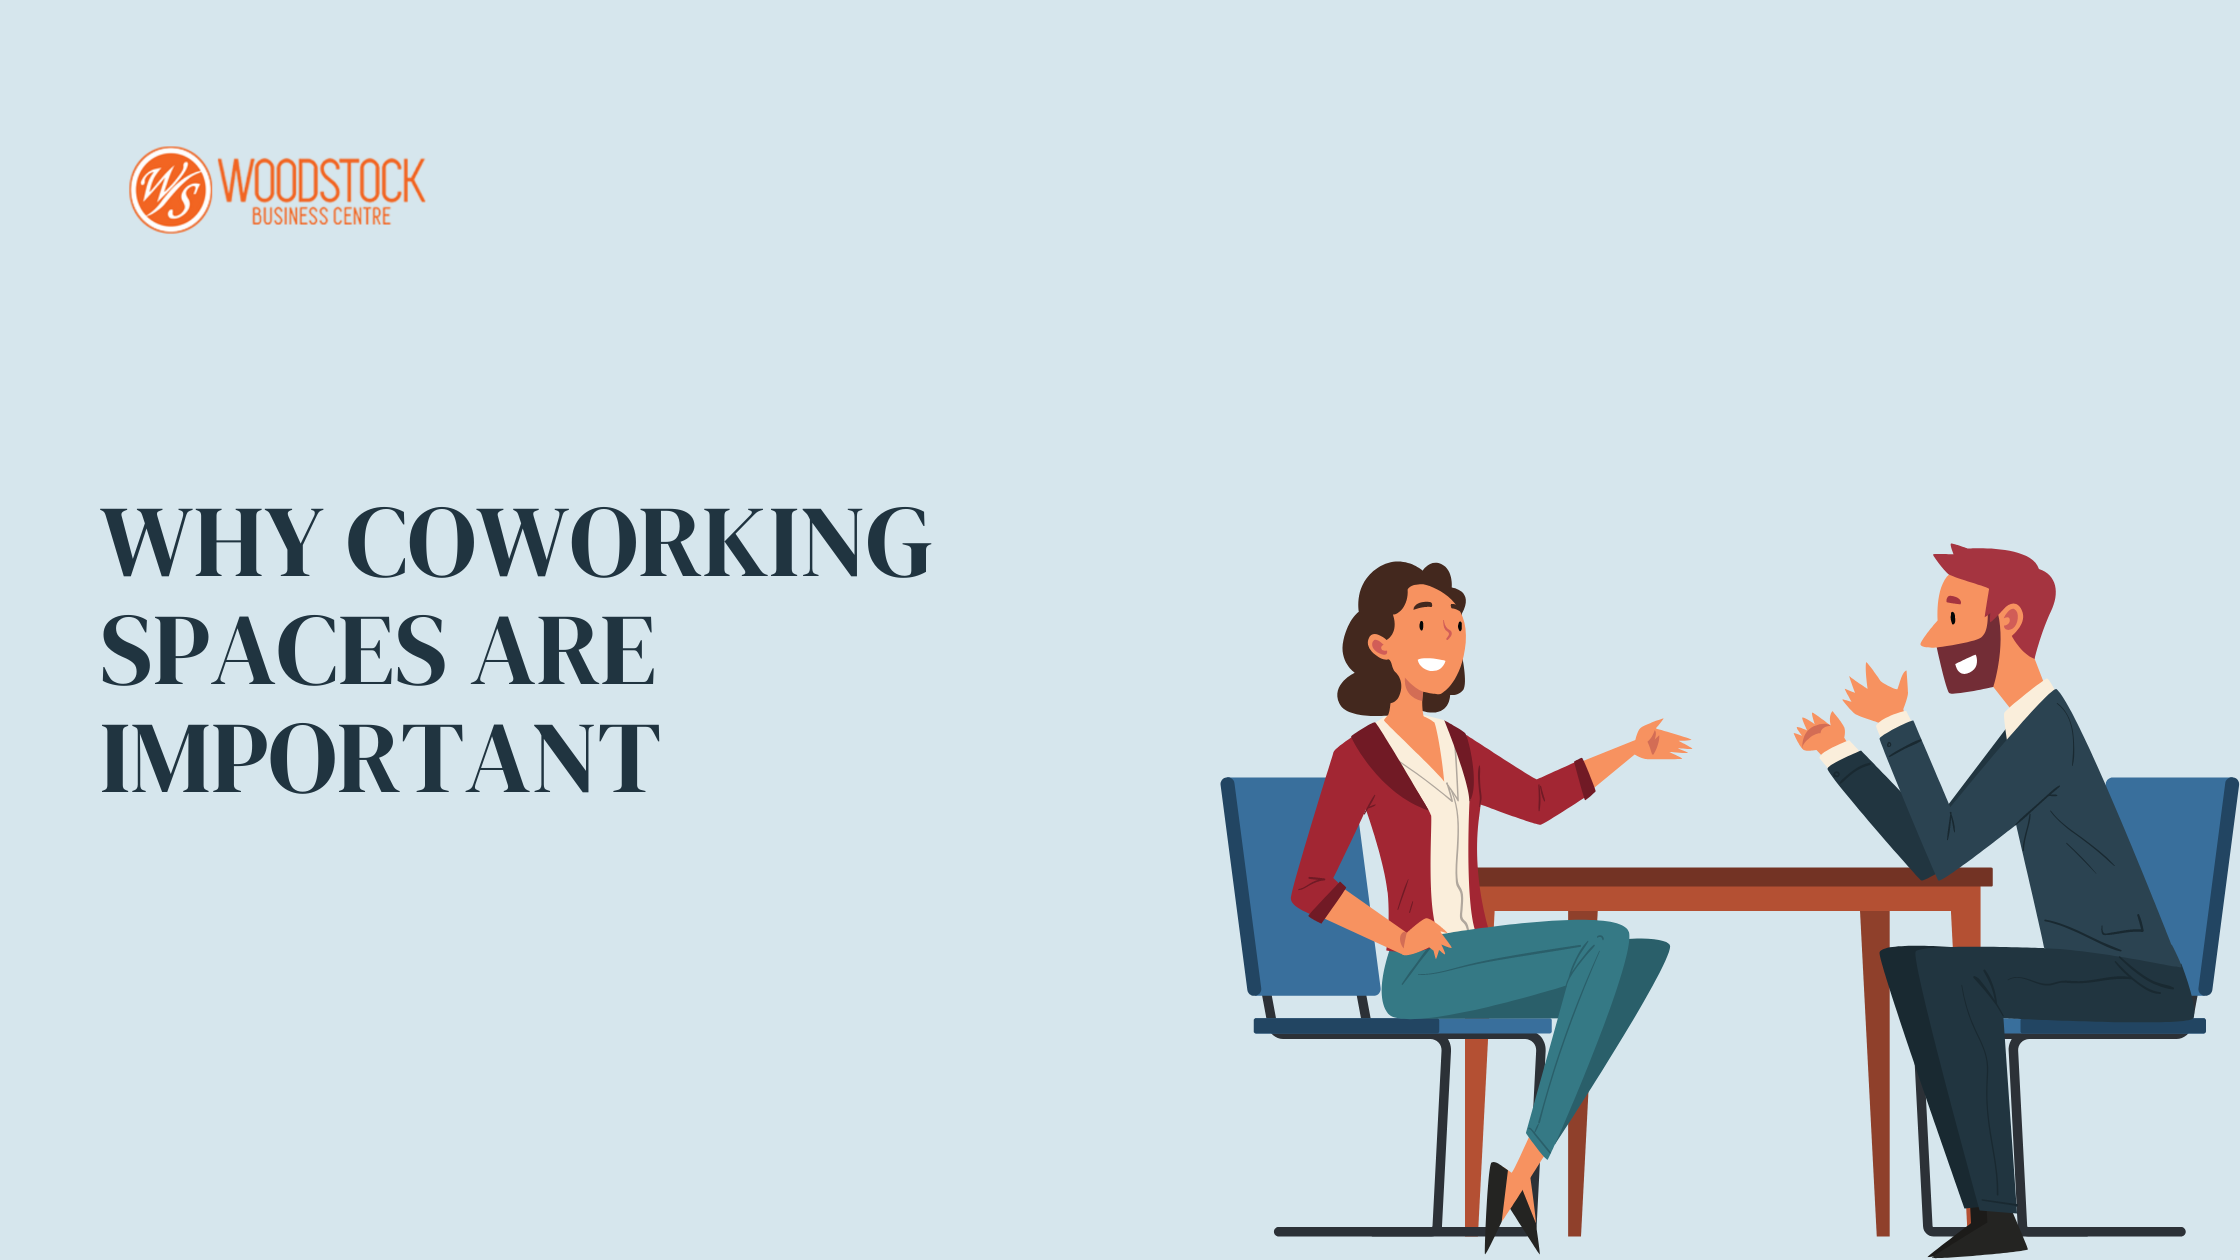 WHY COWORKING SPACES ARE IMPORTANT?